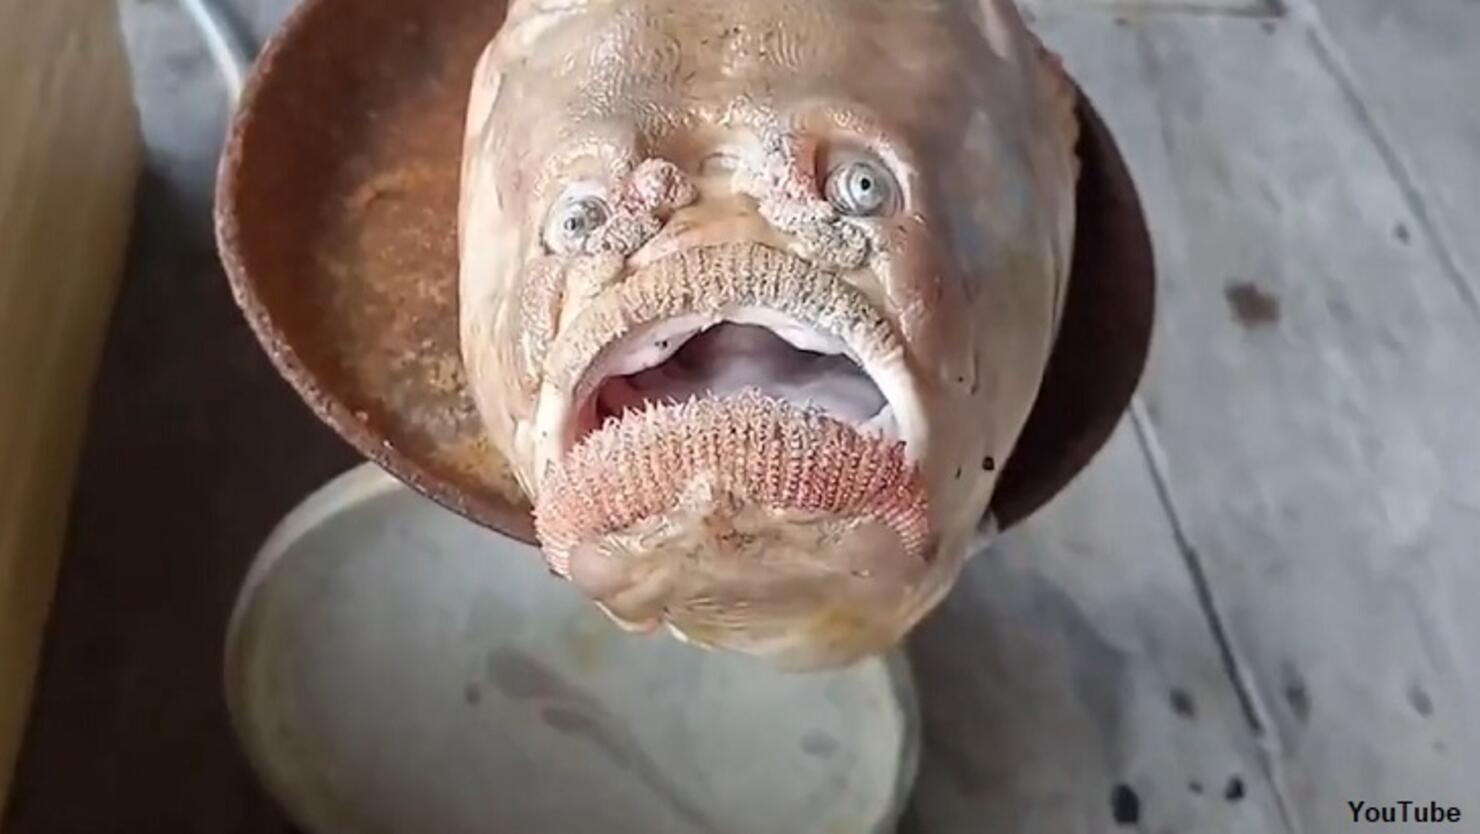 Watch: Fish with Eerie Human-Like Face Caught in Thailand